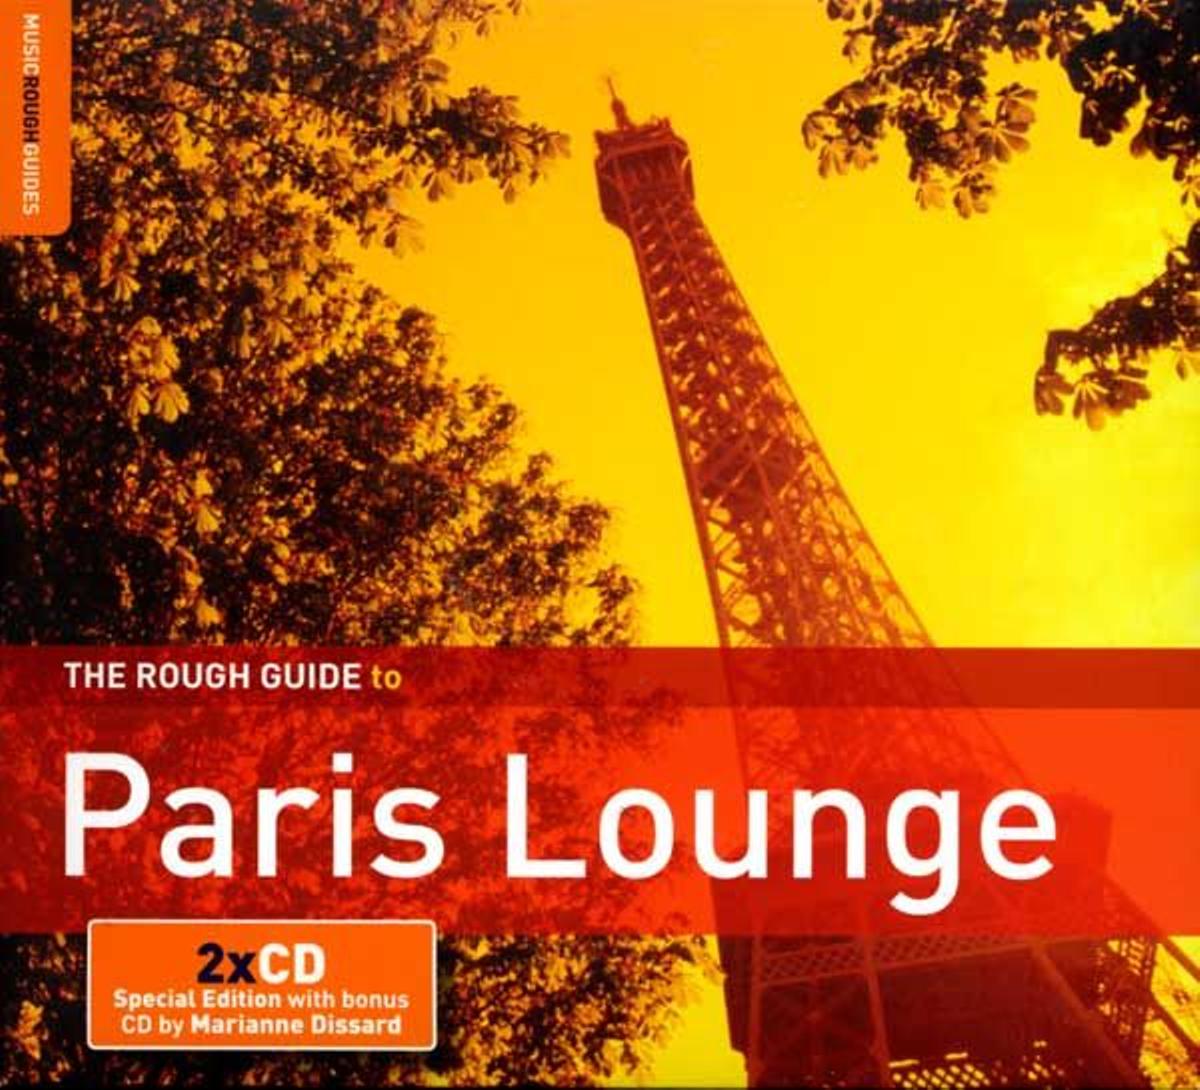 The Rough Guide to Paris Lounge